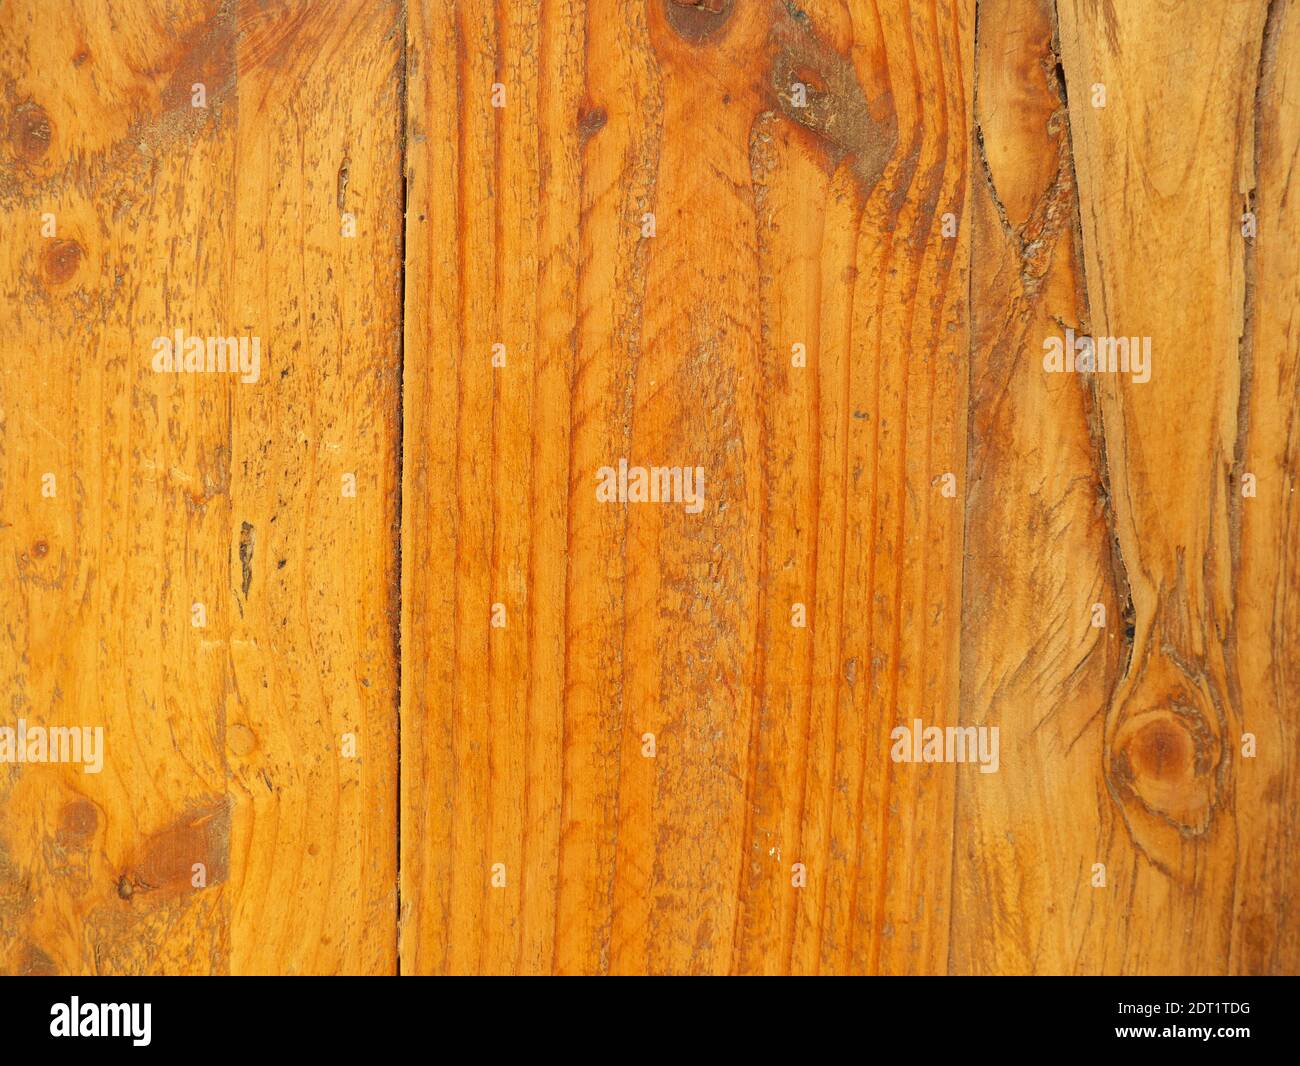 Natural surface of rustic wood flooring with wide vertical planks Stock Photo